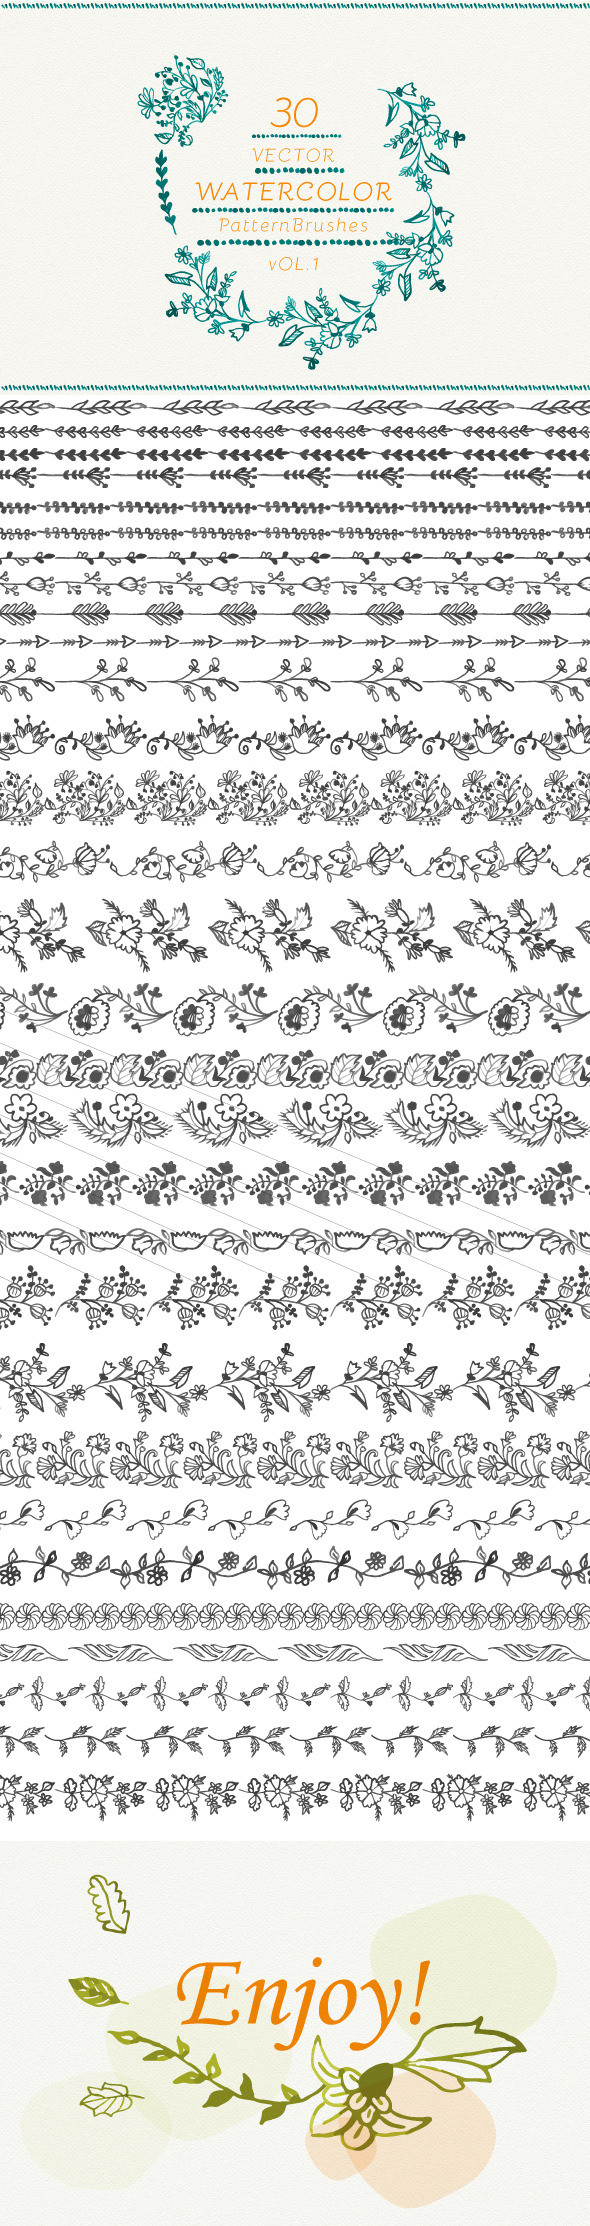 Watercolorpatternbrushes preview